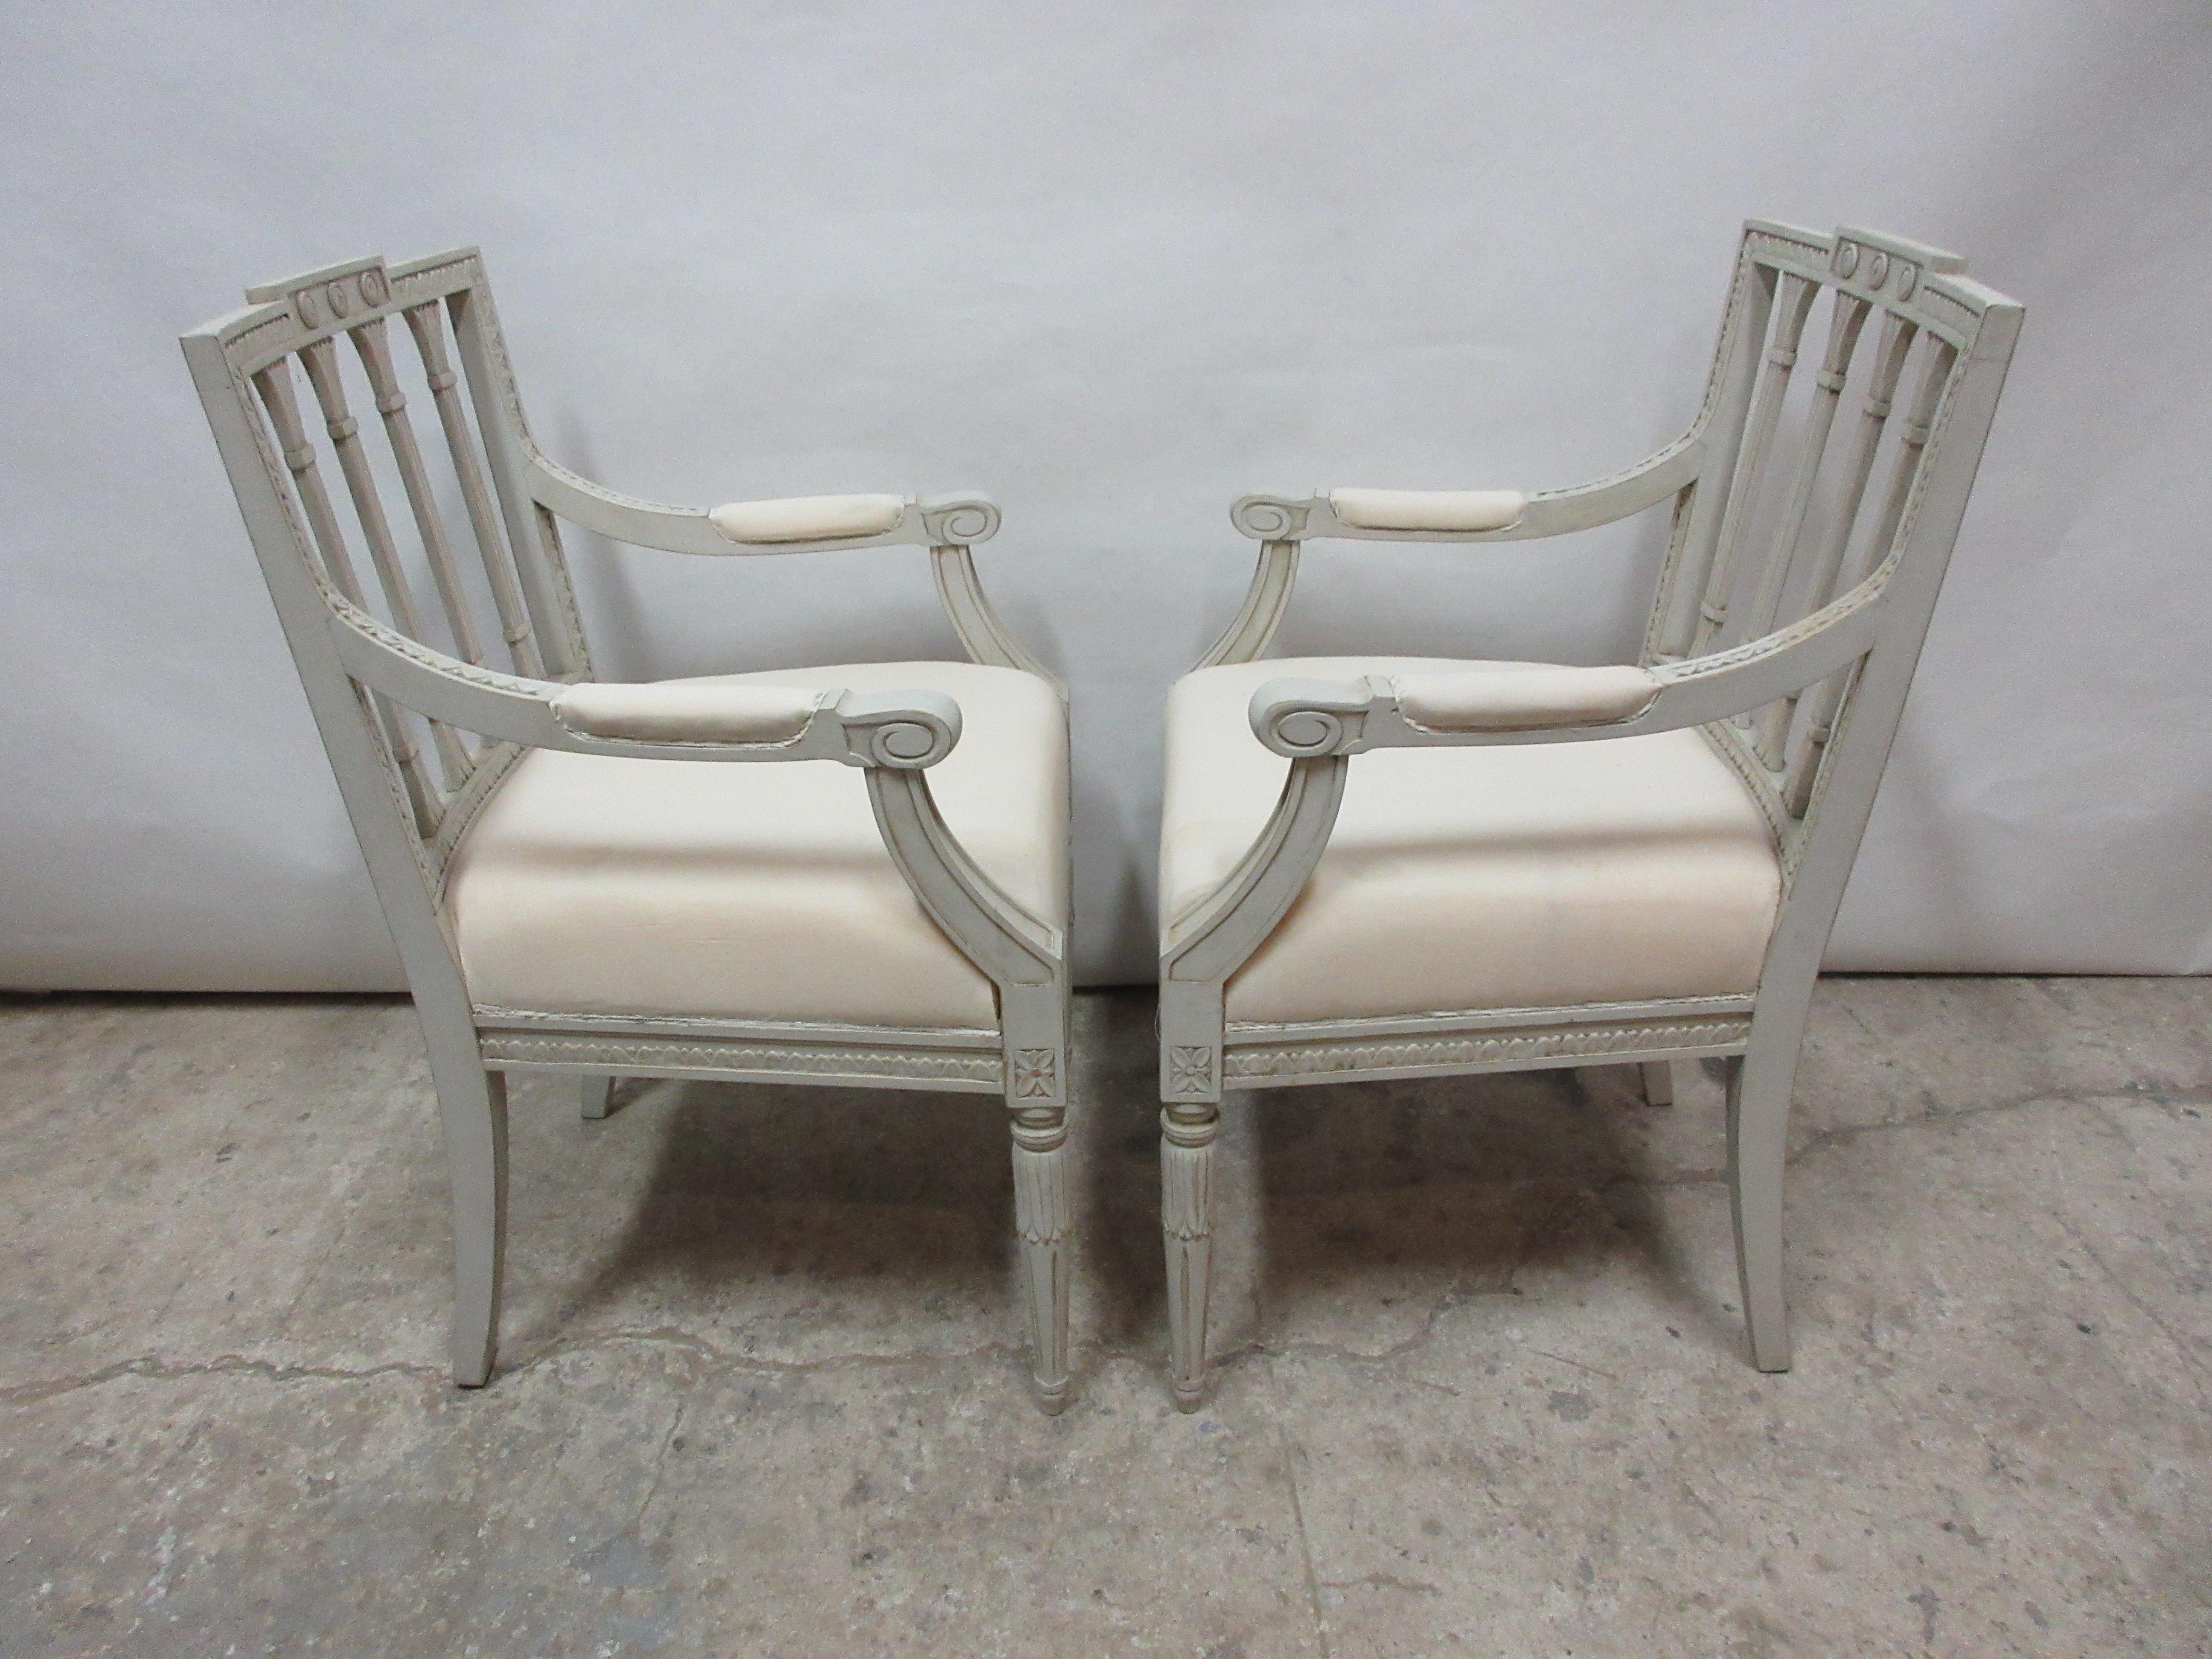 This is a set of 2 Swedish Gustavian armchairs. They have been restored and repainted with milk paints 